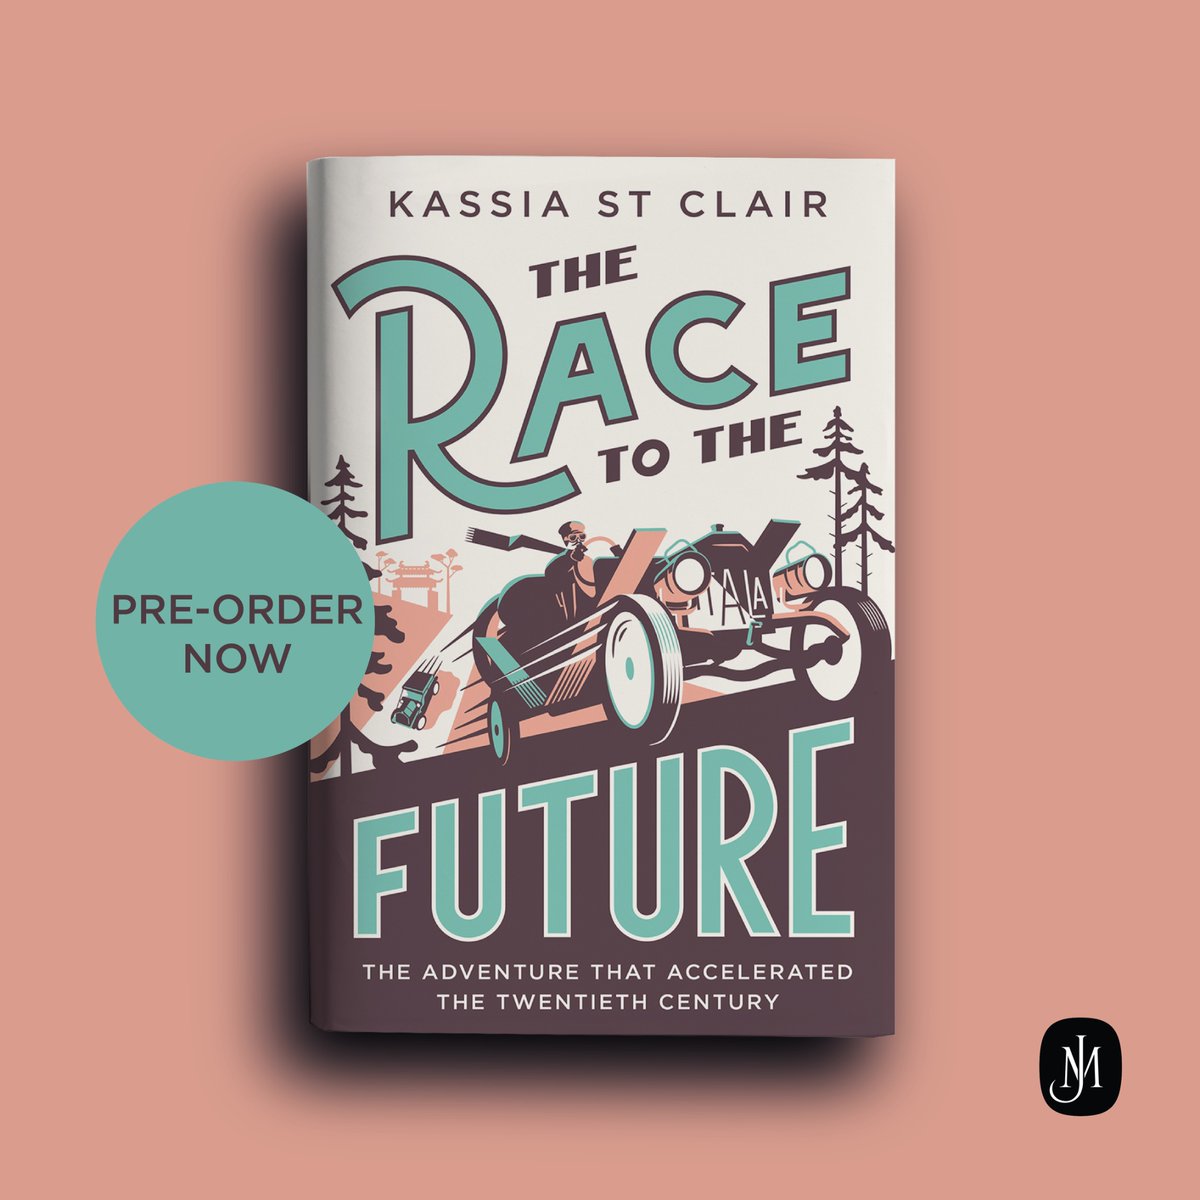 This new book I’ve been working on has a cover that I can finally share with the world. What do you think? I’m hopelessly biased, but I think it’s a thing of beauty 😍